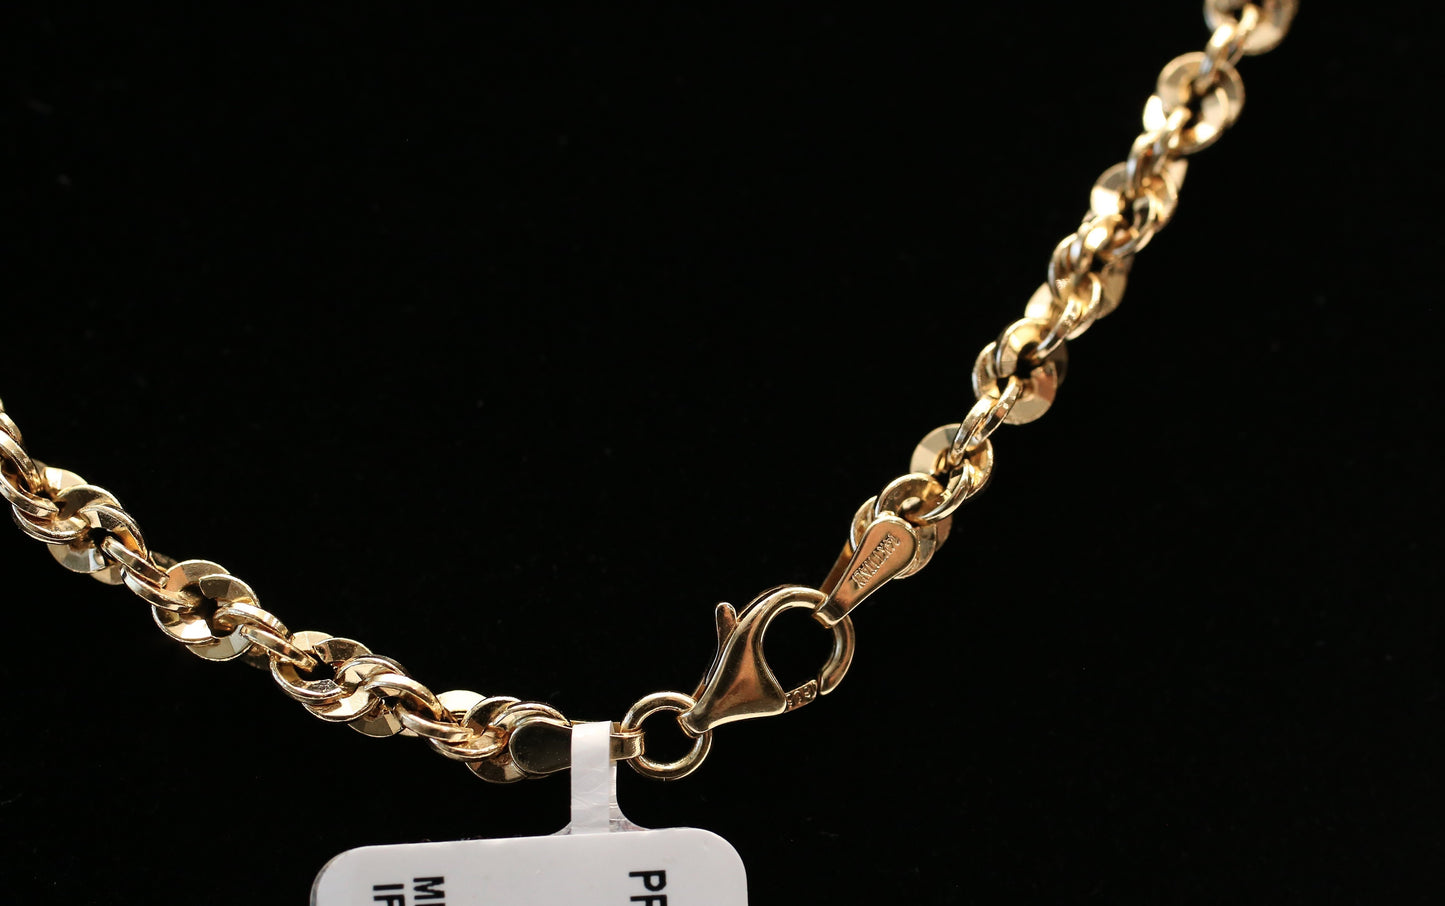 NEW 14k Yellow Gold Rope Chain, 22 inches - 5.7g